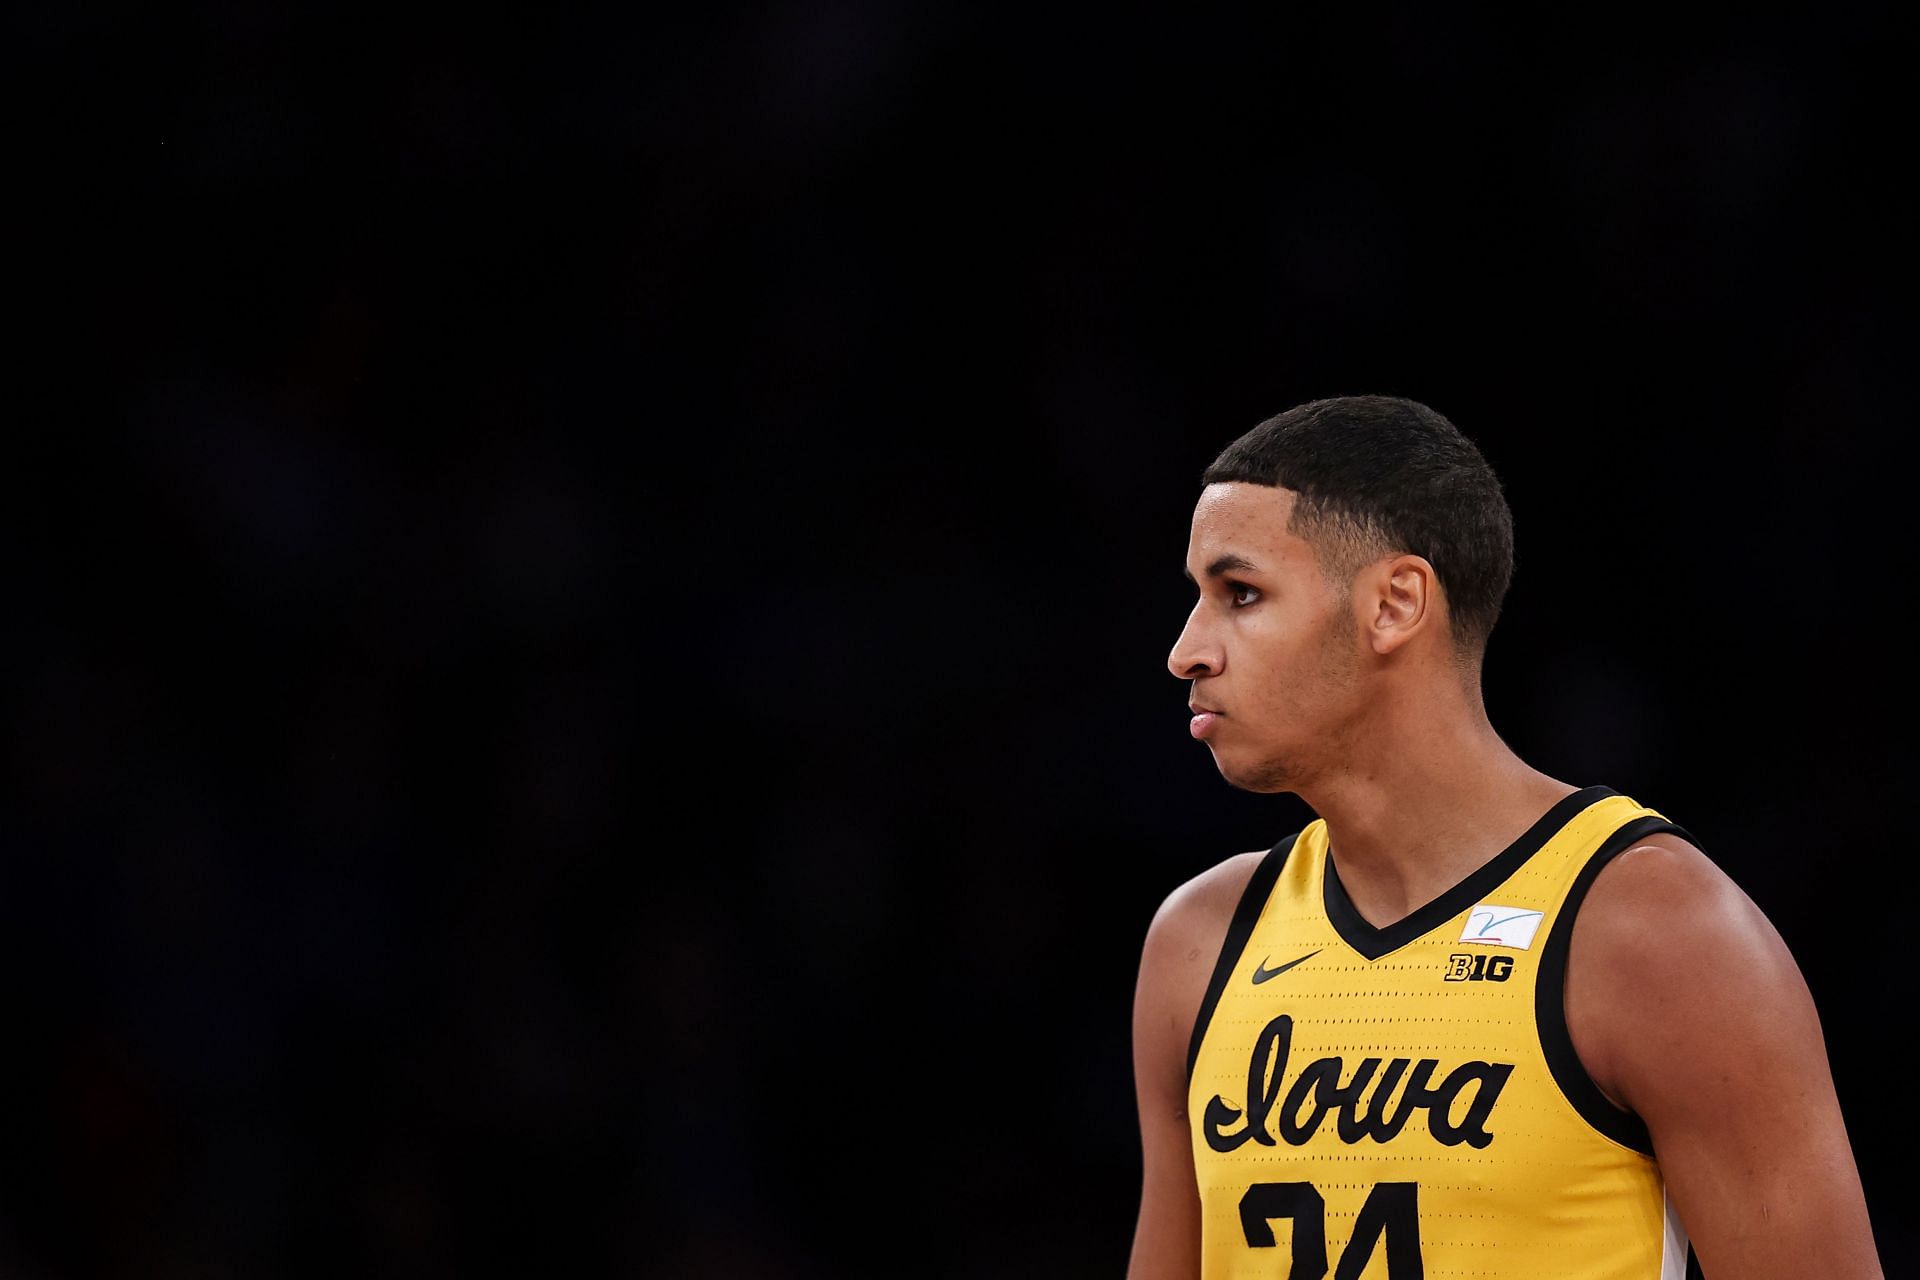 Iowa Hawkeyes wing Kris Murray continues to impress